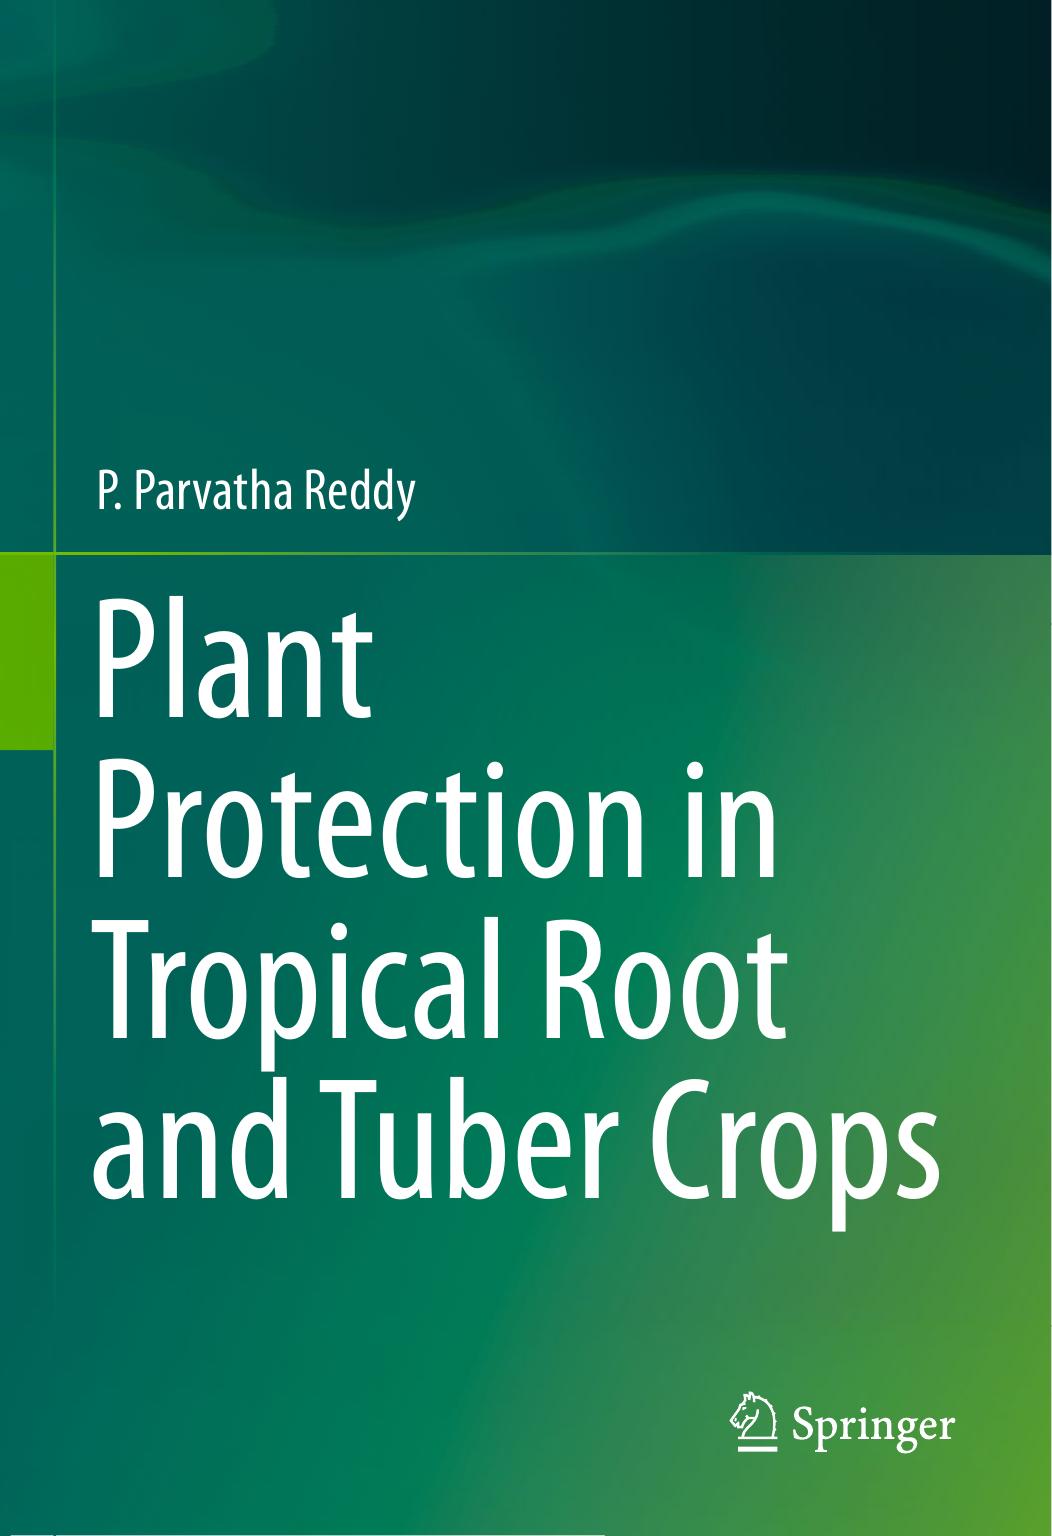 Plant Protection in Tropical Root and Tuber Crops 2015